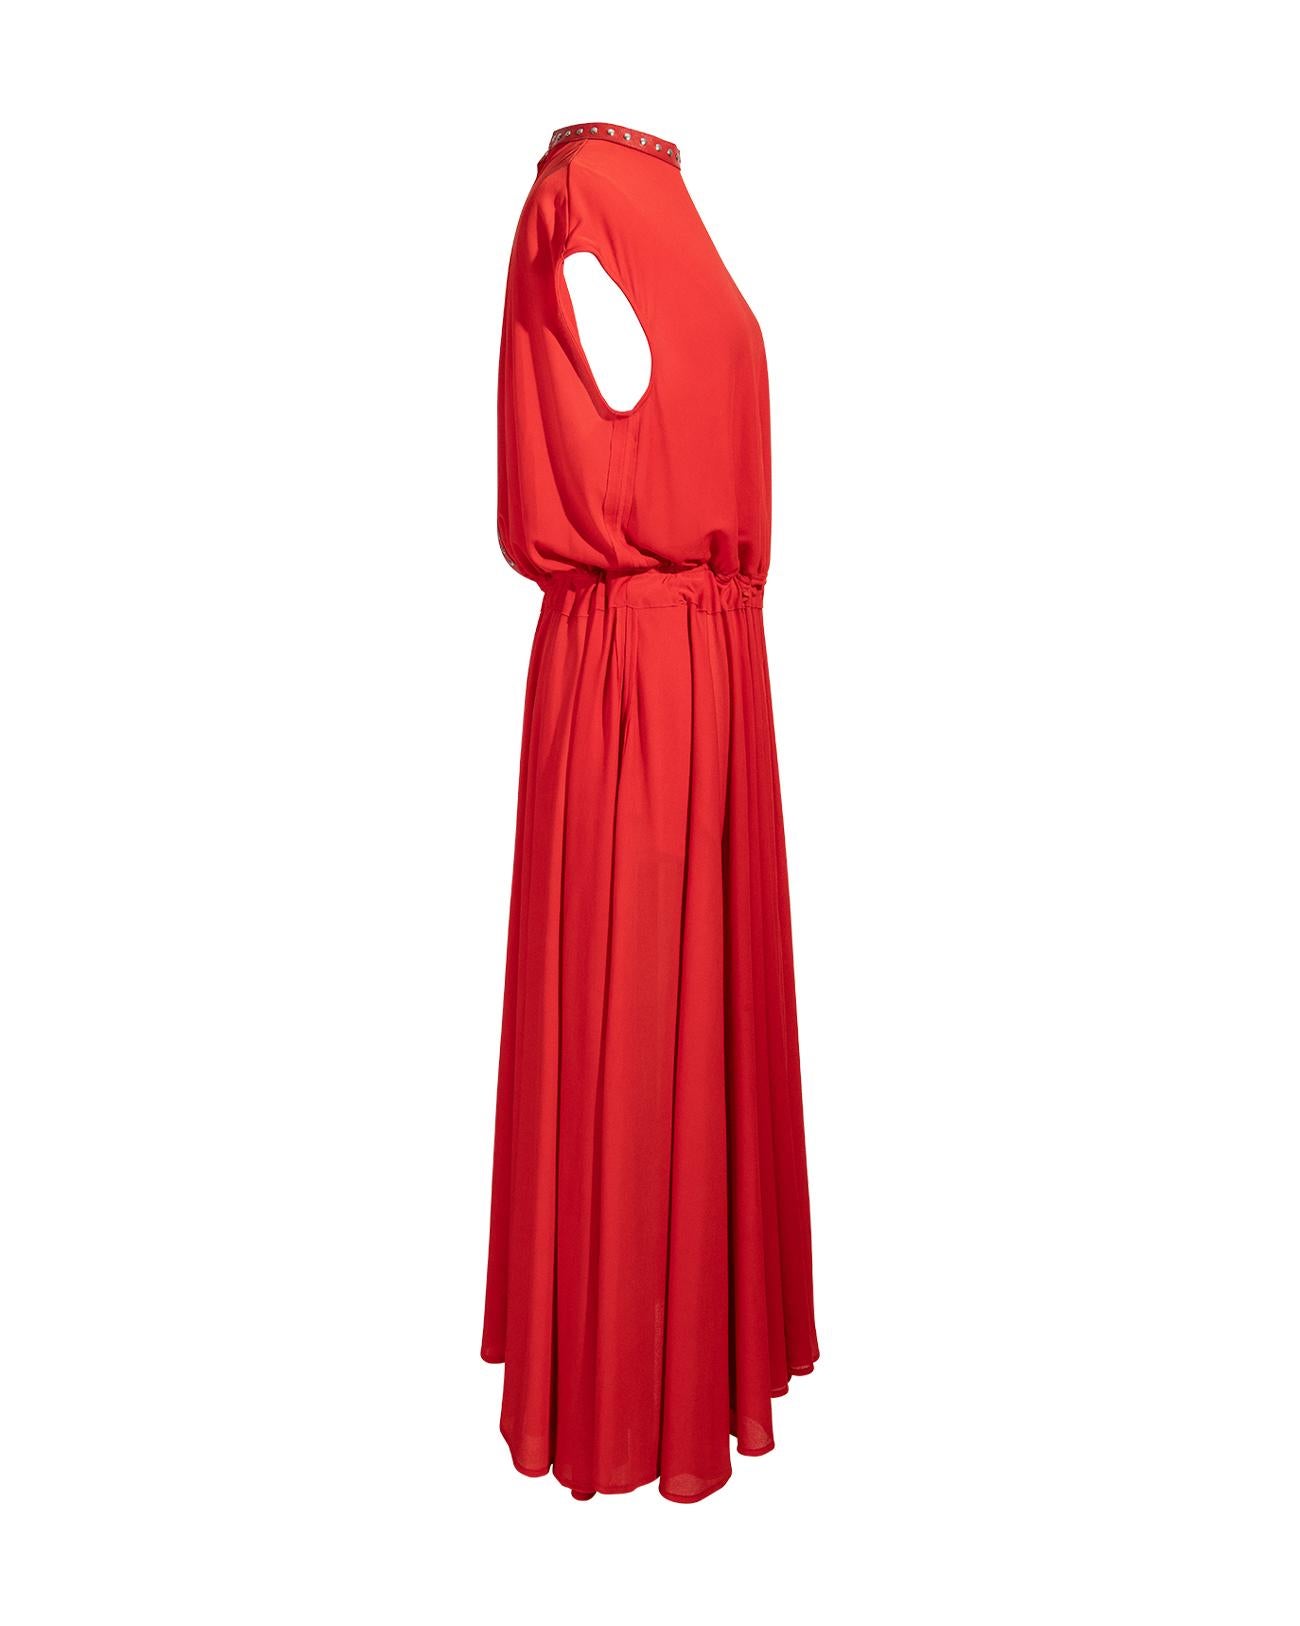 Pre-fall 2017 Old Céline by Phoebe Philo Reversible Red Cap Sleeve Dress 3